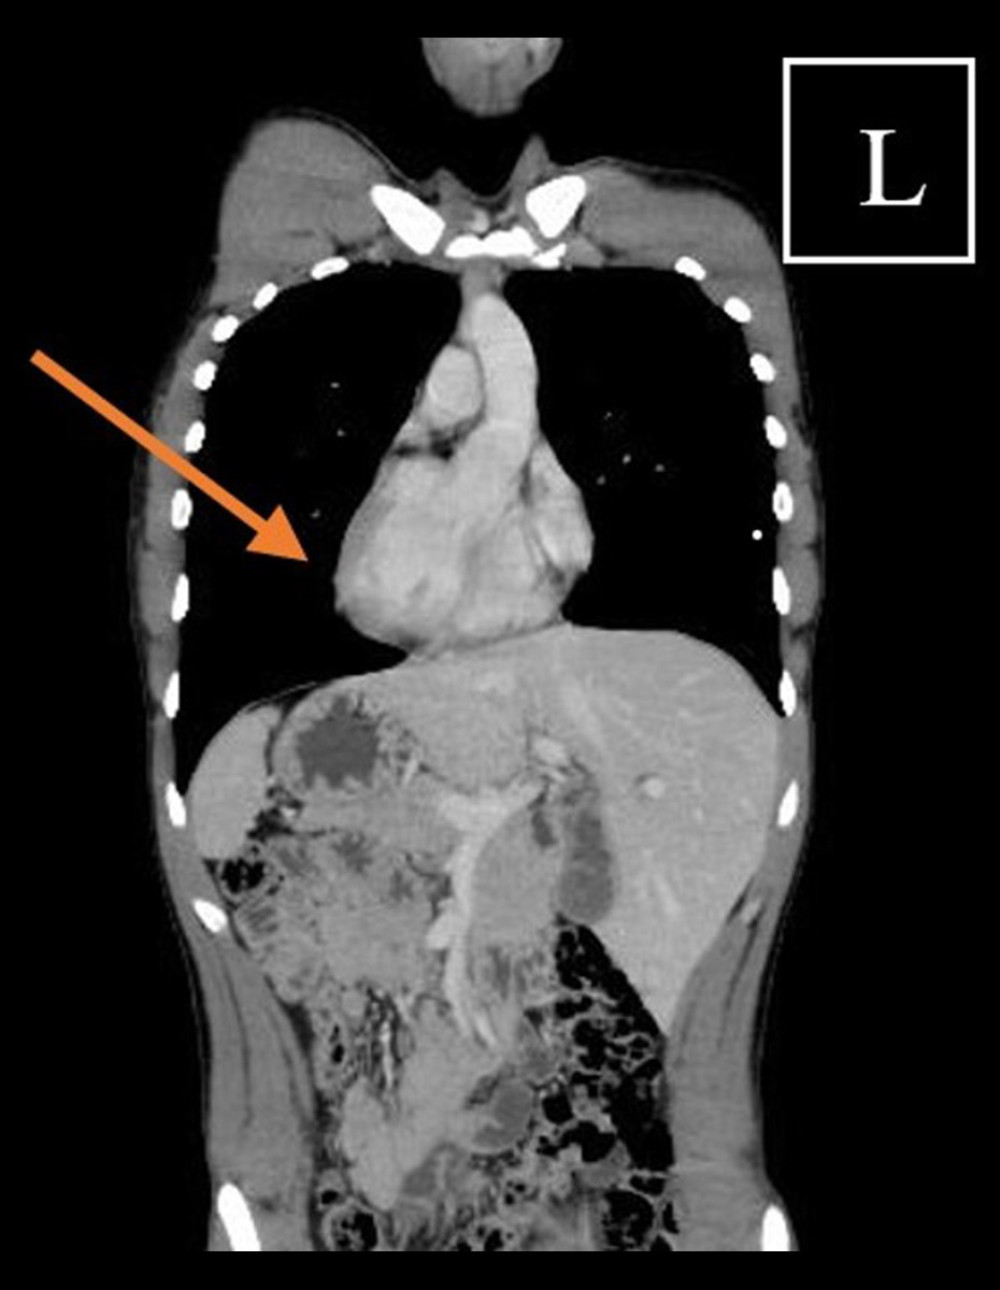 Axial chest CT scan showing dextrocardia. The arrow points to the left ventricle.